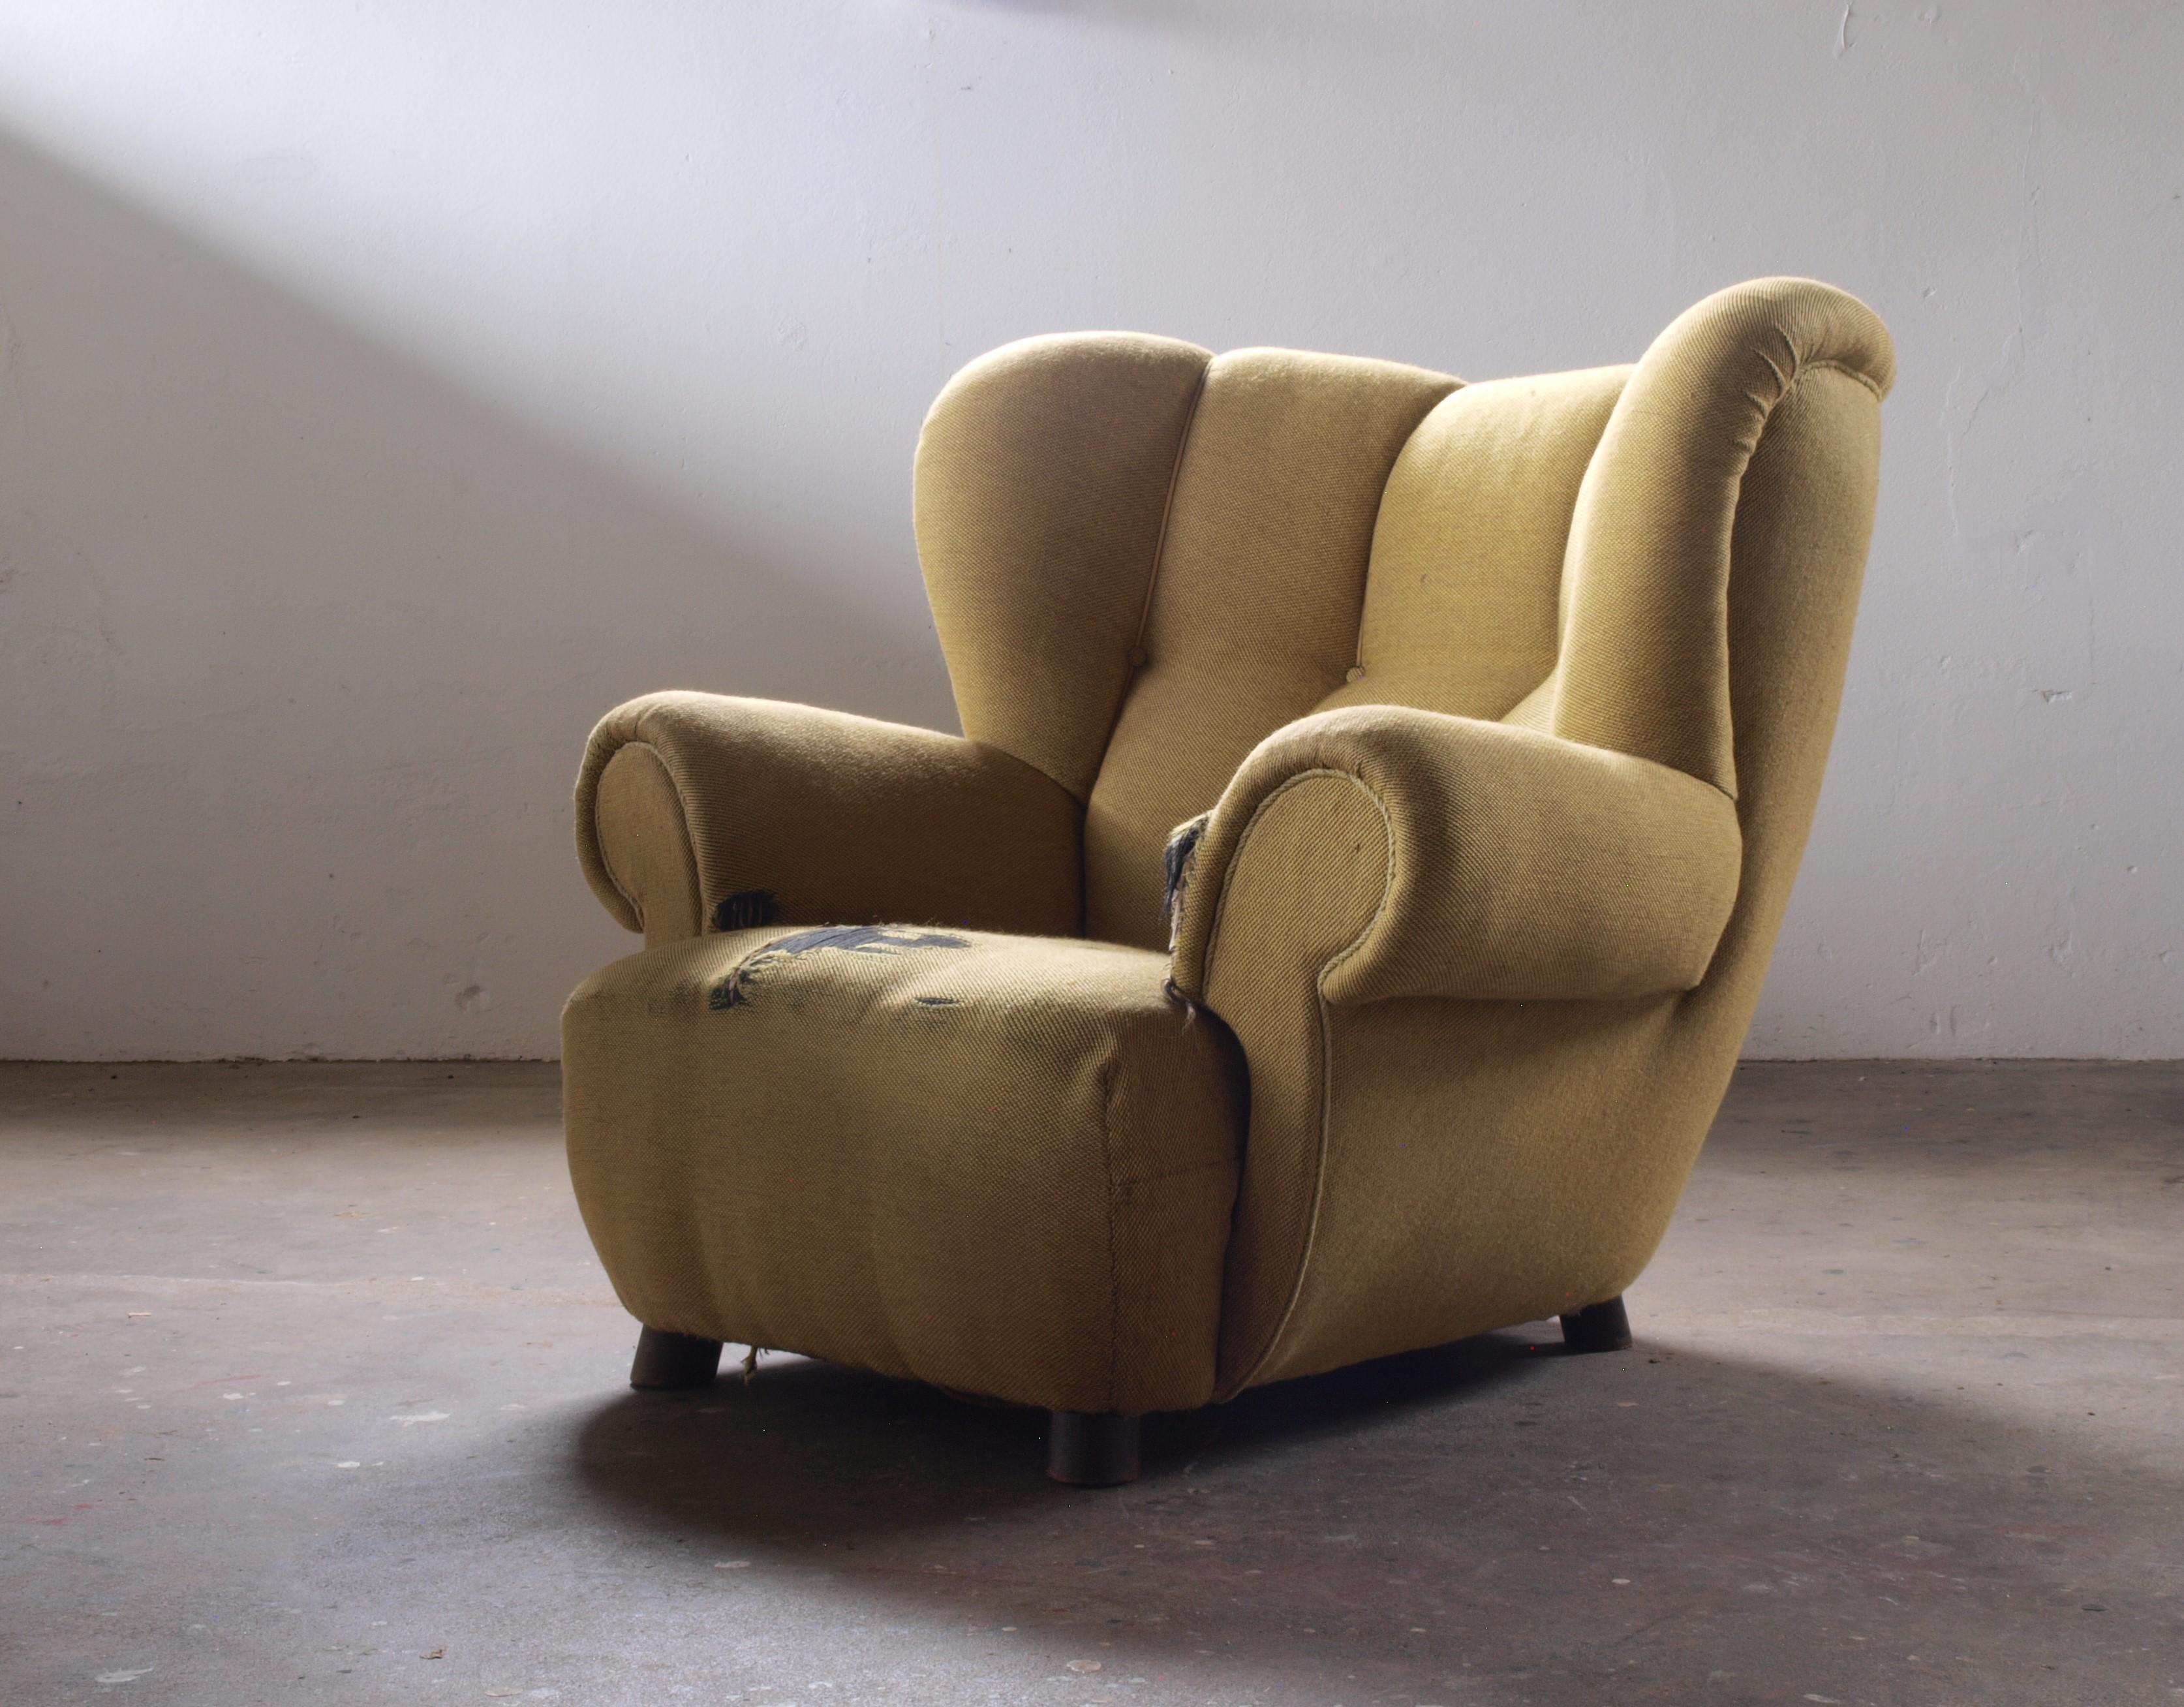 Large upholstered armchair from around the 1930s. Comfortable and embracing. Comparable to Flemming Lassen's style. Potentially reupholstered in lambswool. Requires ample space due to its size and presence. Comes with a matching footstool for